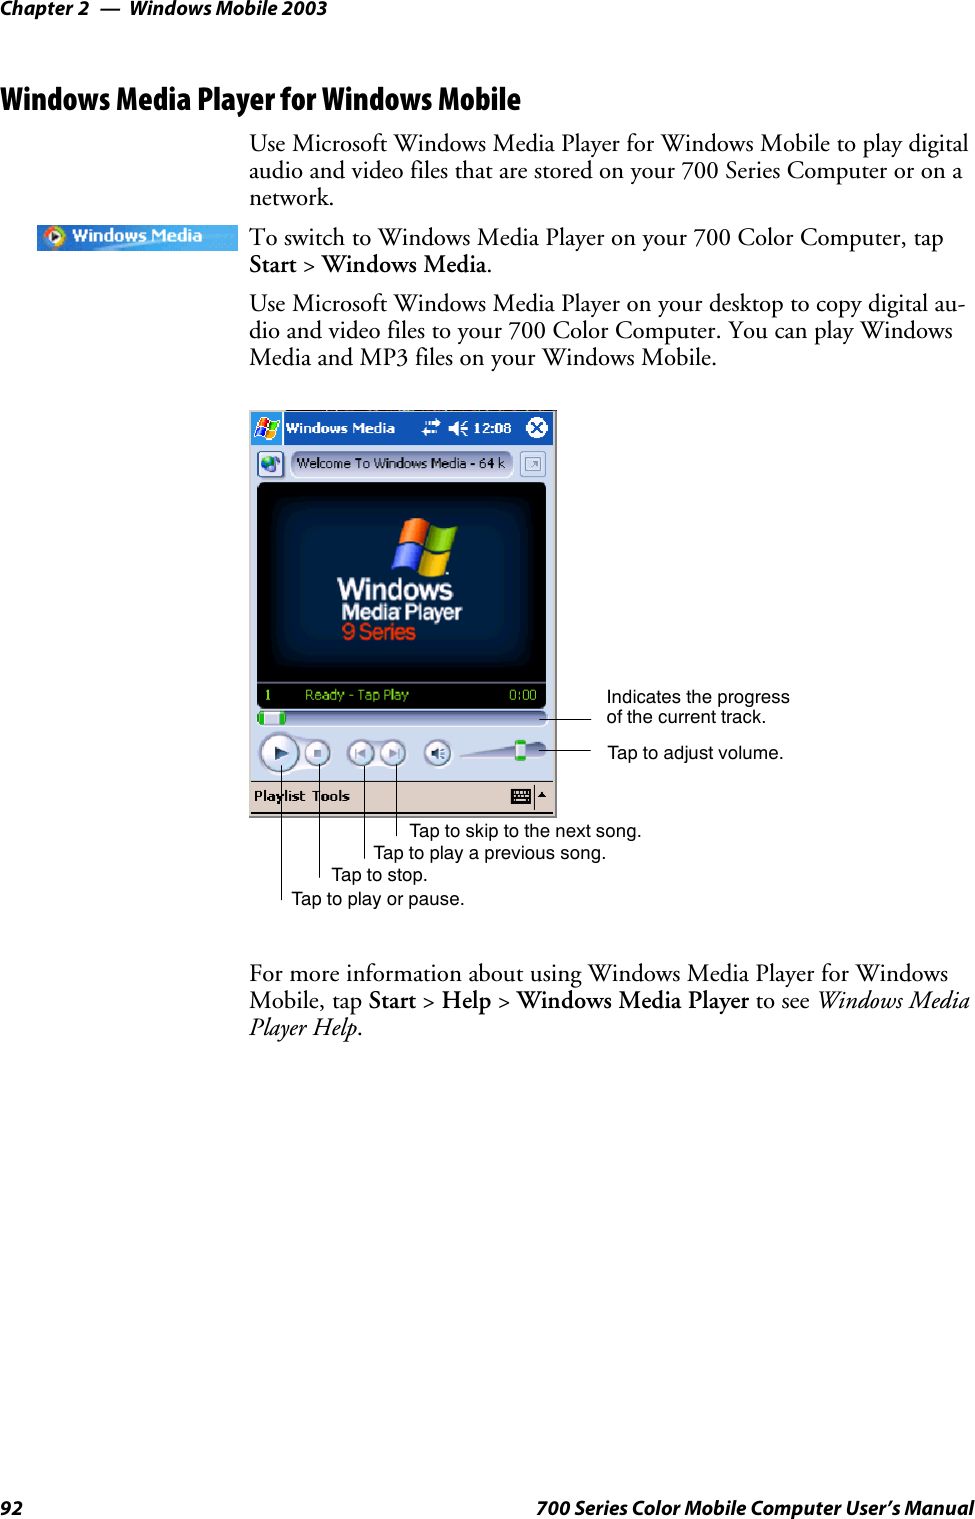 Windows Mobile 2003Chapter —292 700 Series Color Mobile Computer User’s ManualWindows Media Player for Windows MobileUse Microsoft Windows Media Player for Windows Mobile to play digitalaudio and video files that are stored on your 700 Series Computer or on anetwork.To switch to Windows Media Player on your 700 Color Computer, tapStart &gt;Windows Media.Use Microsoft Windows Media Player on your desktop to copy digital au-dio and video files to your 700 Color Computer. You can play WindowsMedia and MP3 files on your Windows Mobile.Indicates the progressof the current track.Tap to adjust volume.Tap to skip to the next song.Tap to play a previous song.Taptostop.Tap to play or pause.For more information about using Windows Media Player for WindowsMobile, tap Start &gt;Help &gt;Windows Media Player to see Windows MediaPlayer Help.